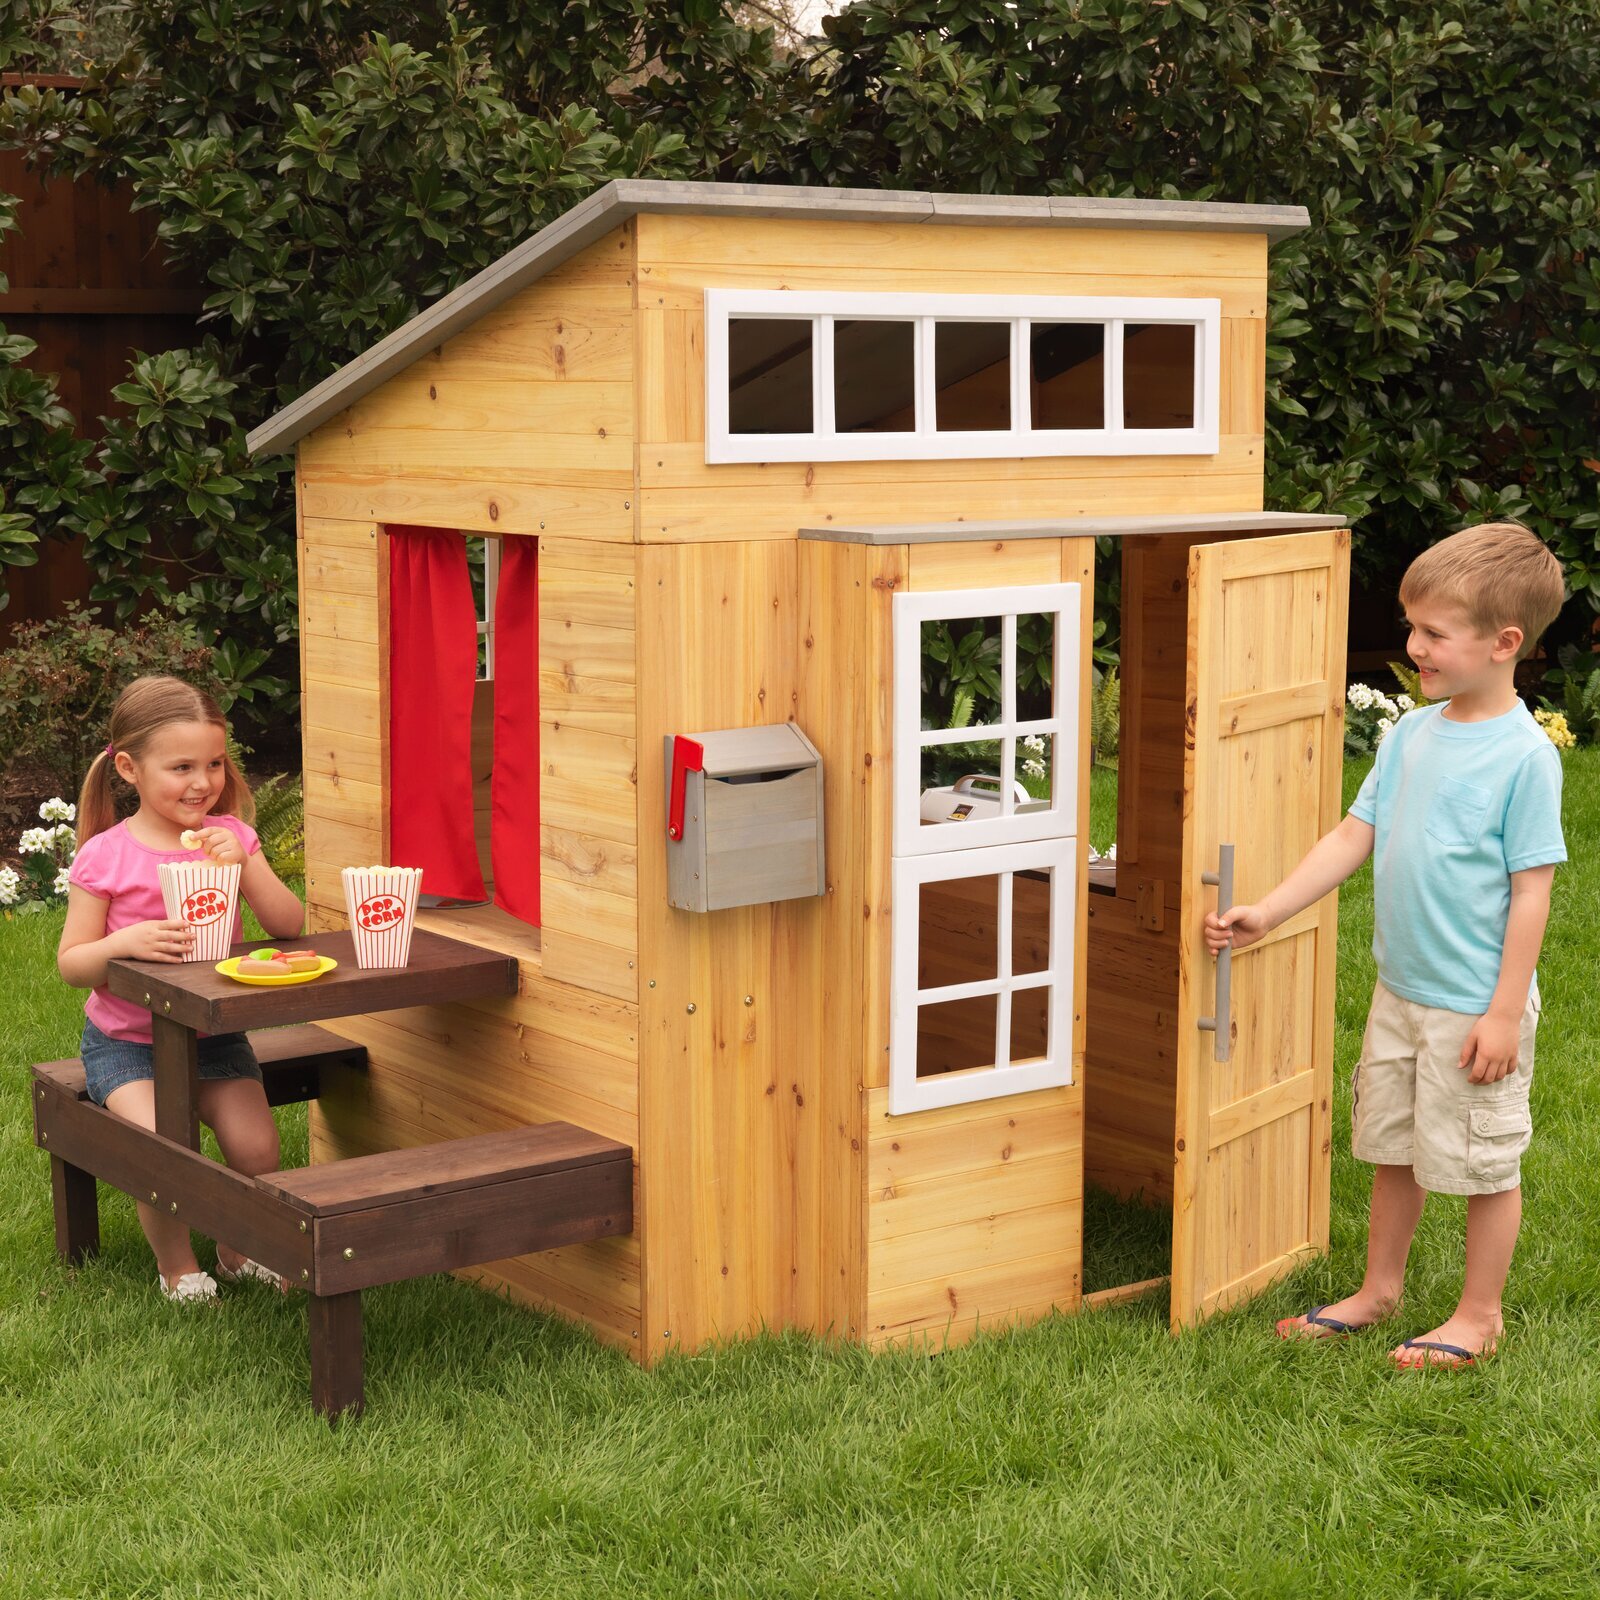 Realistic Wooden Playhouse With Table and Chairs